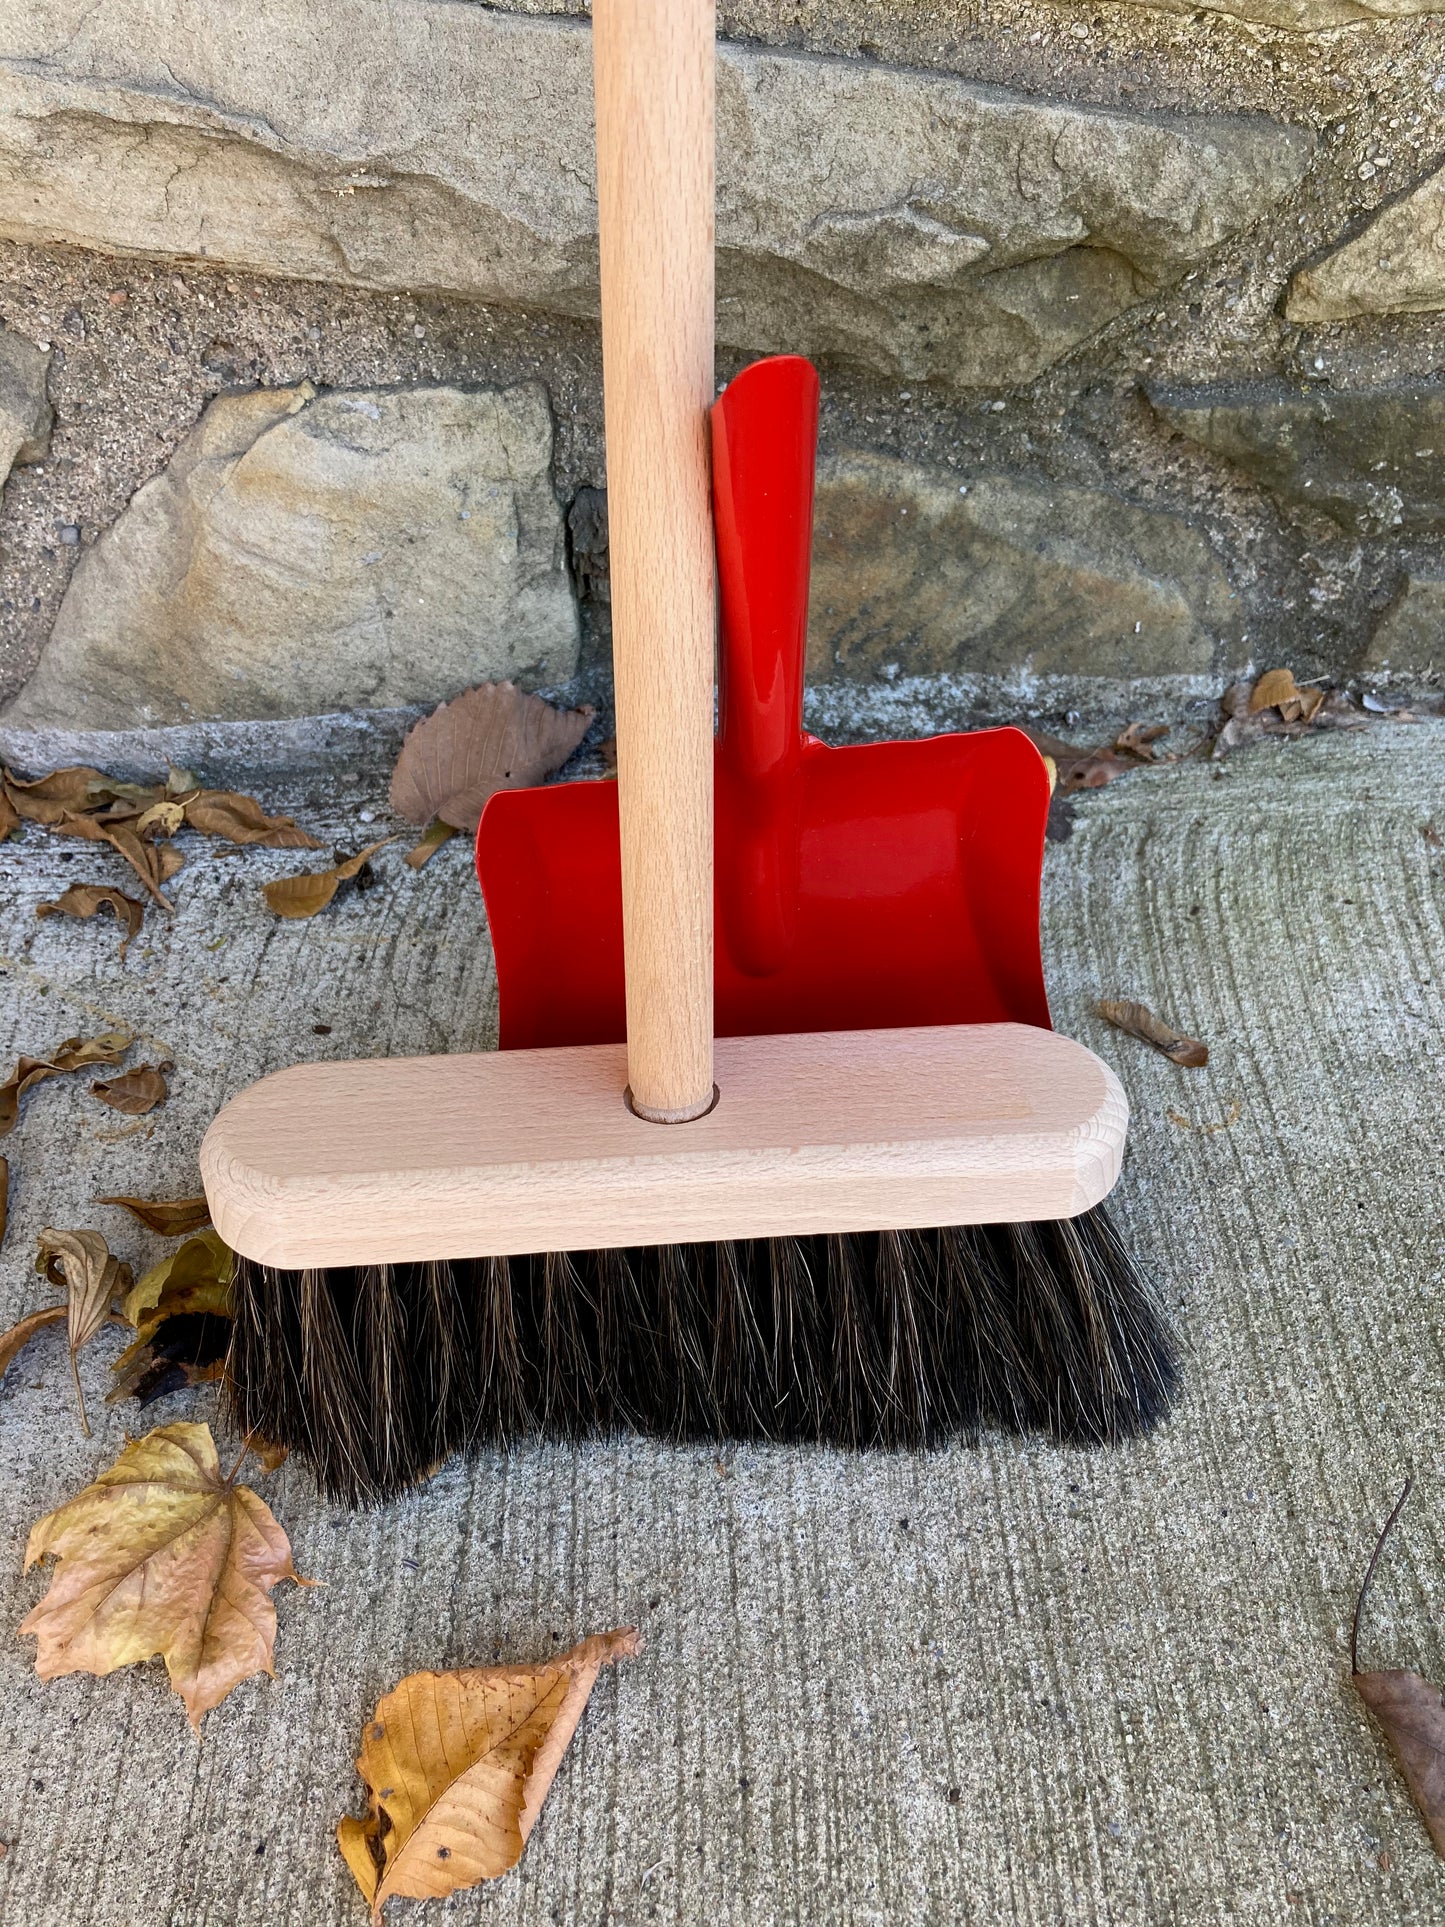 Child's WOODEN BROOM and Red Metal DUST PAN